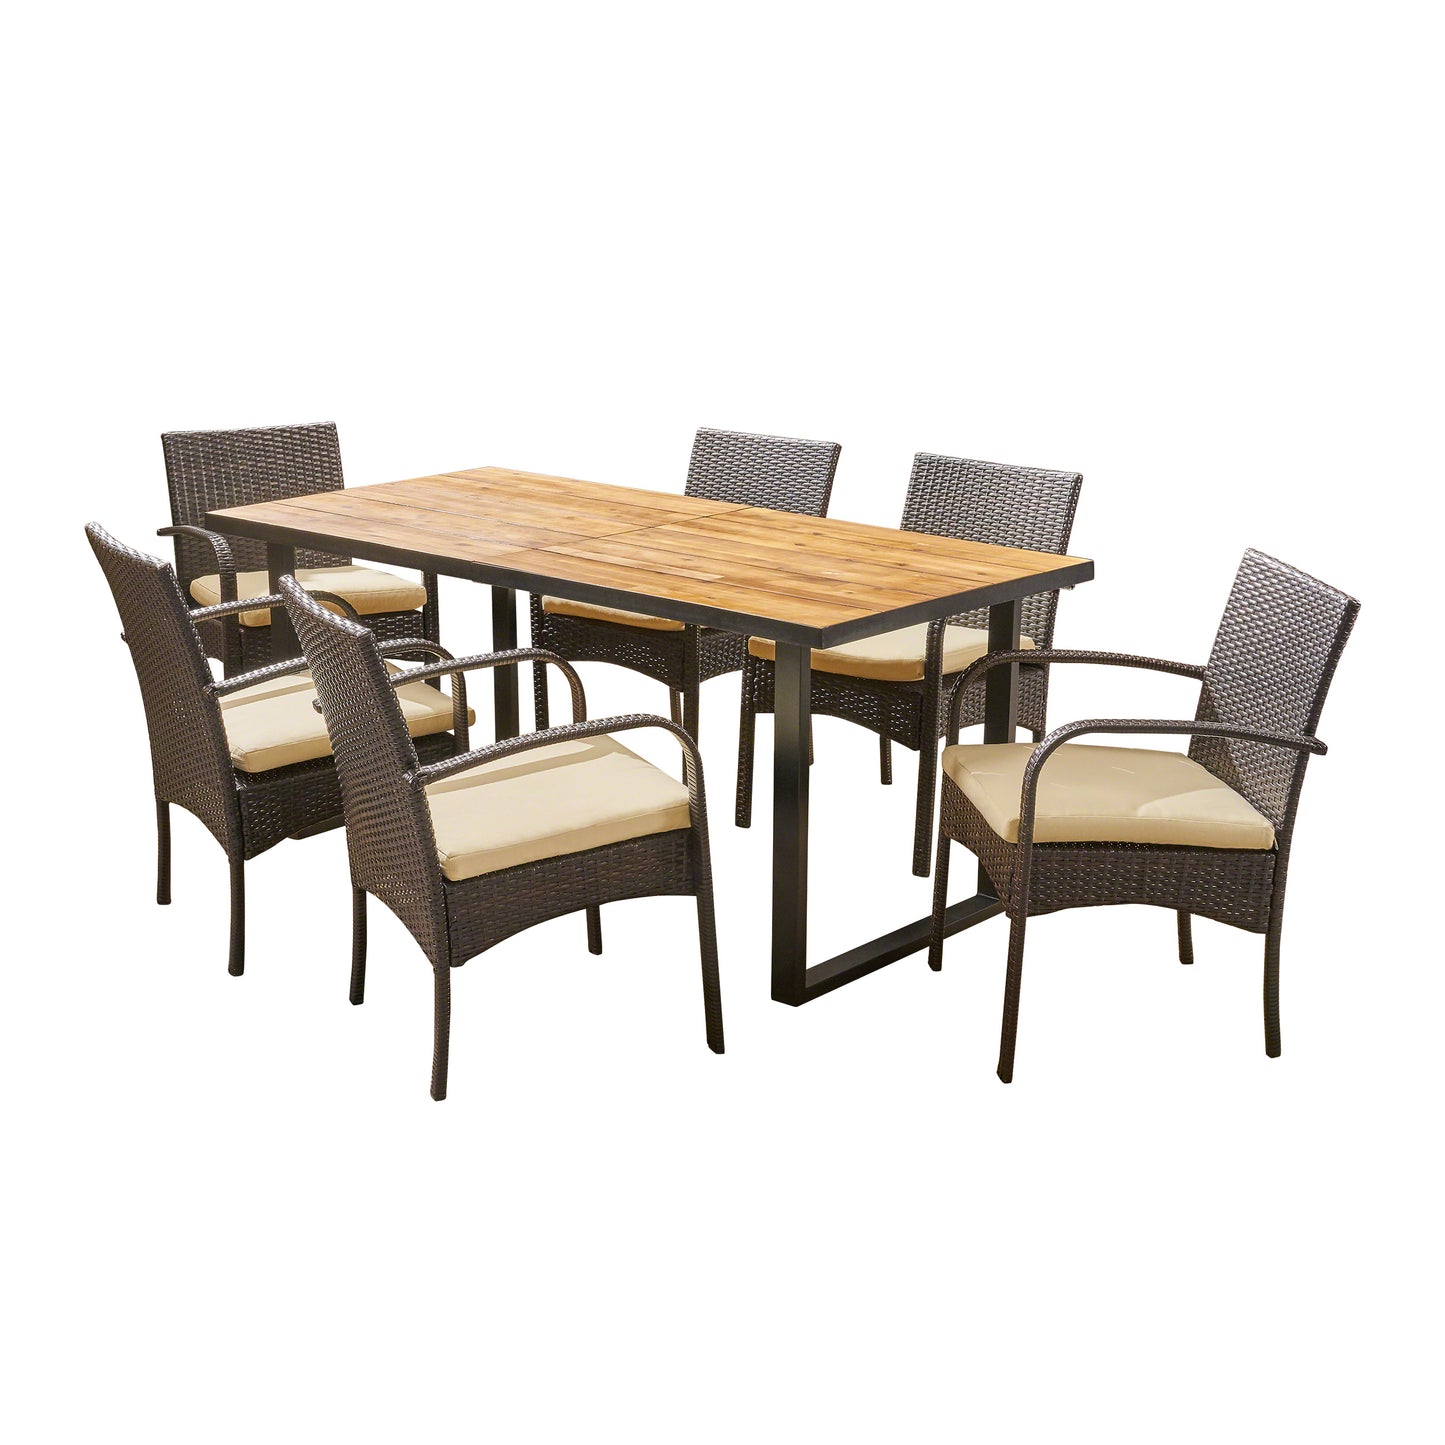 Amenda Outdoor 6-Seater Rectangular Acacia Wood and Wicker Dining Set, Teak with Black and Multi Brown with Cream